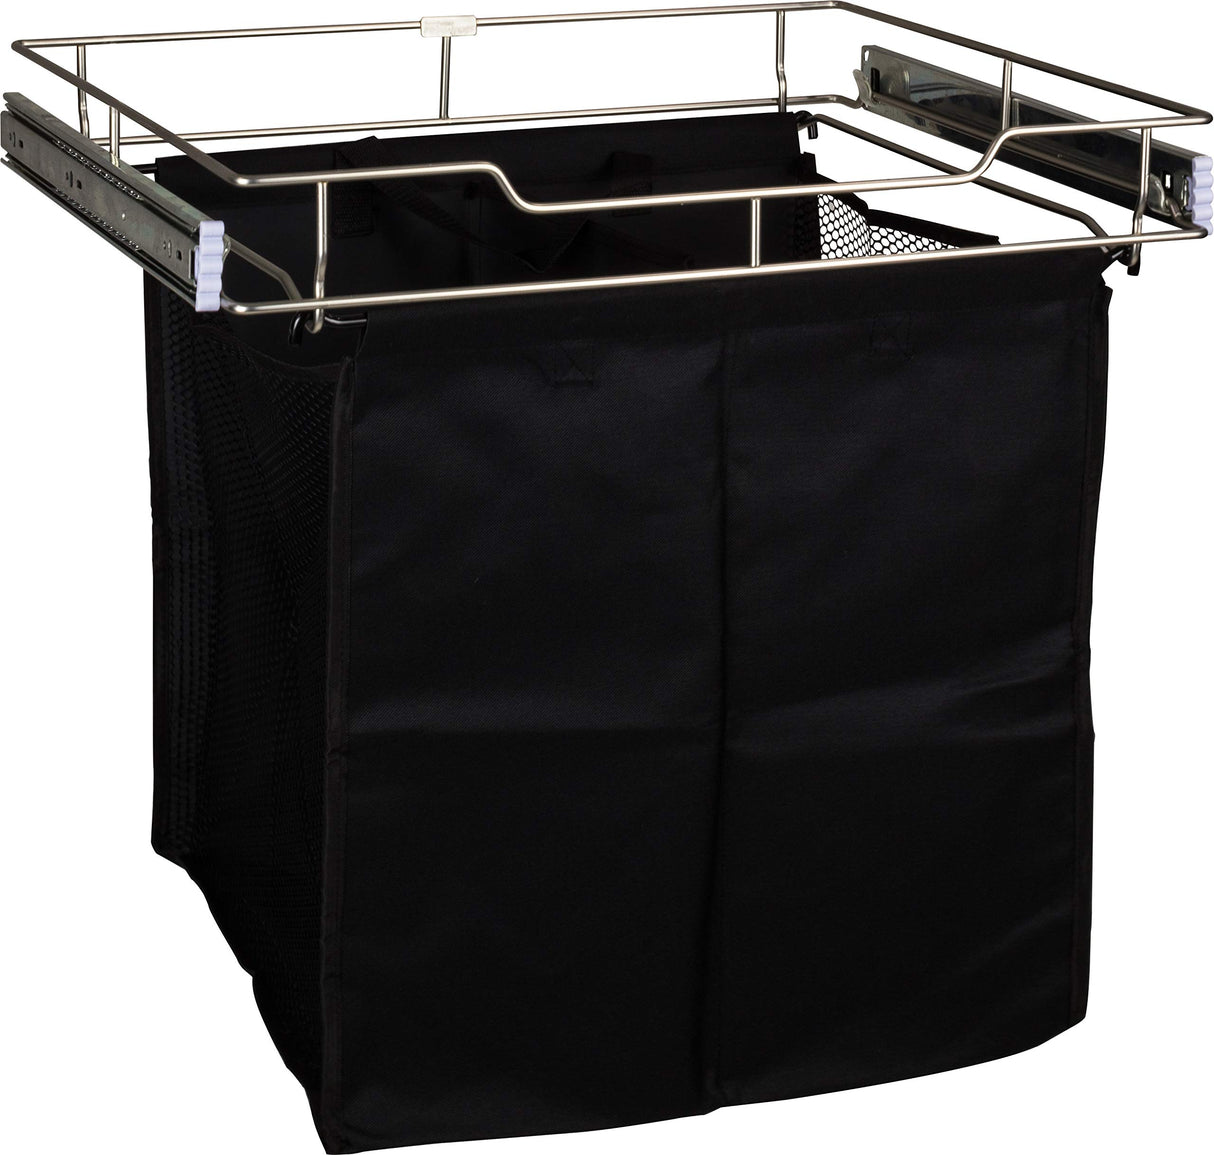 Hardware Resources POHS-18ORB Dark Bronze 18" Deep Pullout Canvas Hamper with Removable Laundry Bag